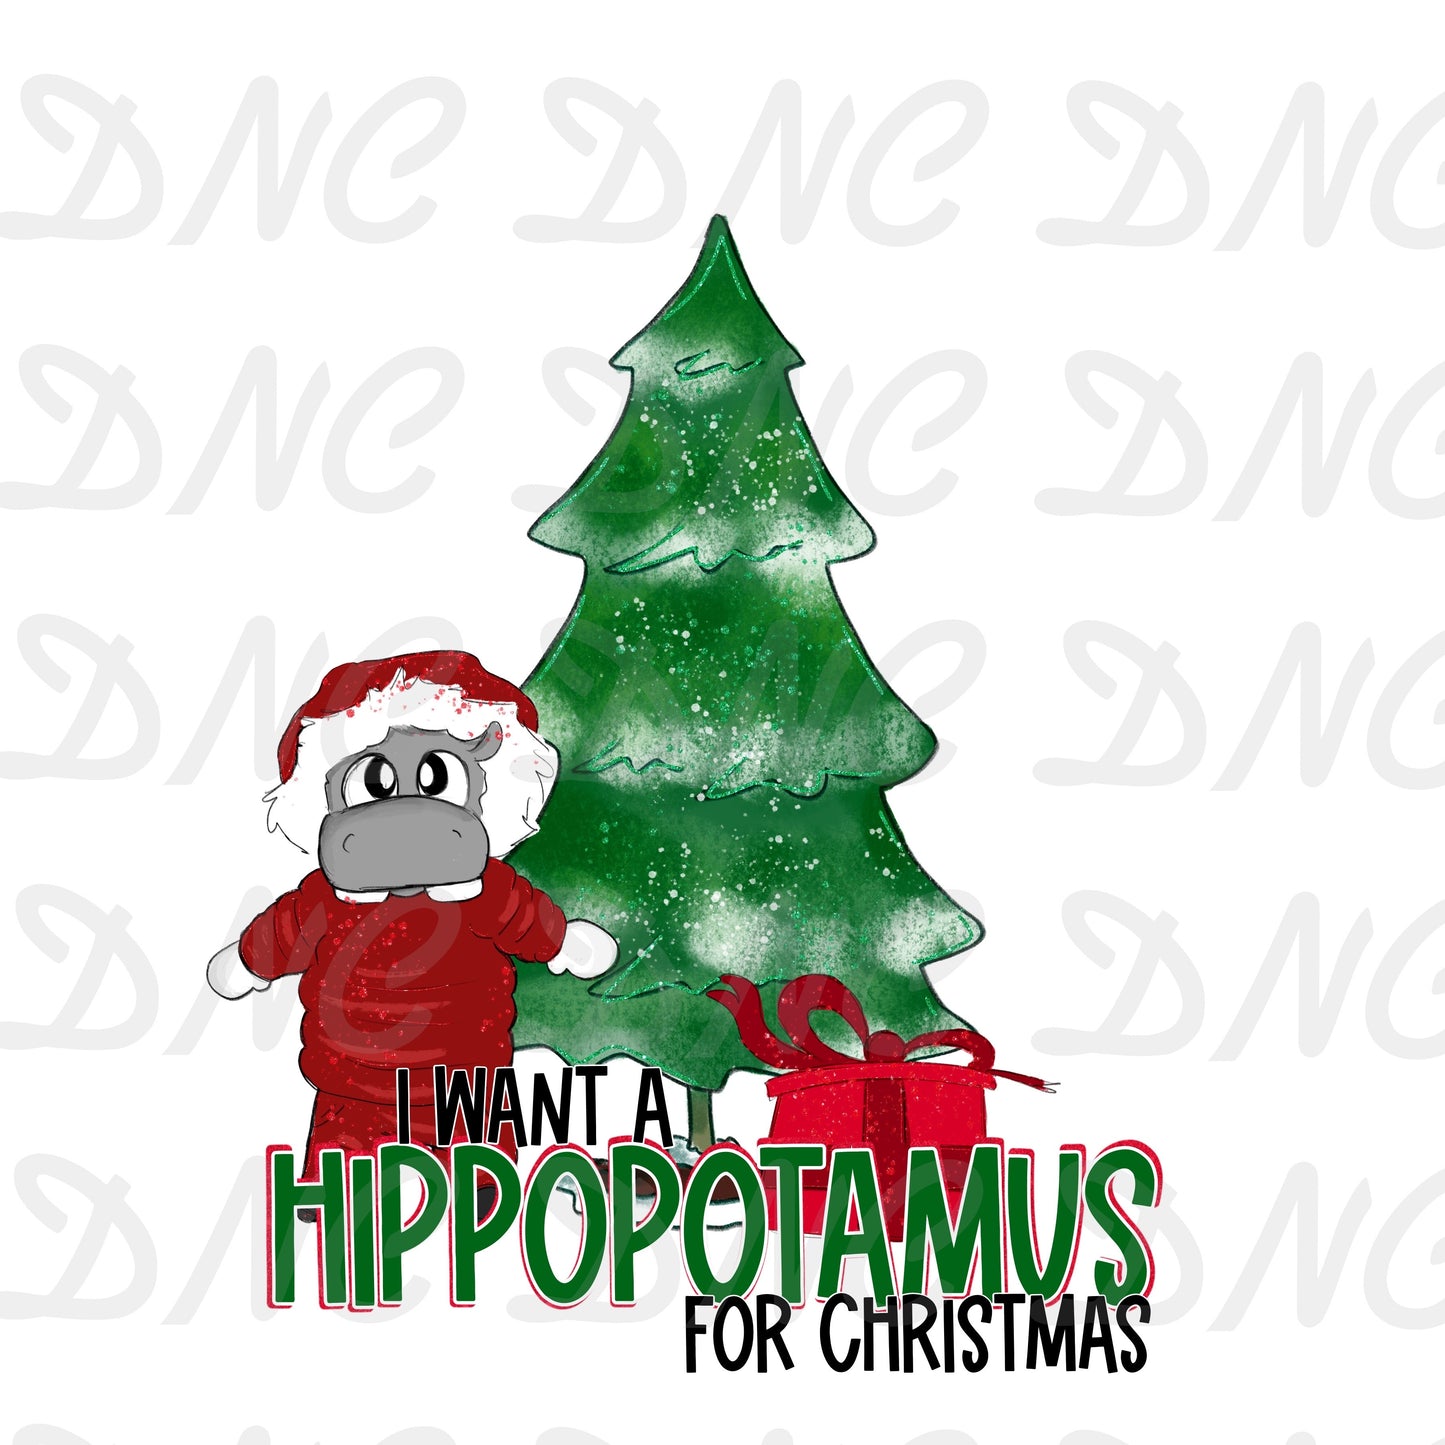 Hippopotamus for christmas with tree - Sublimation